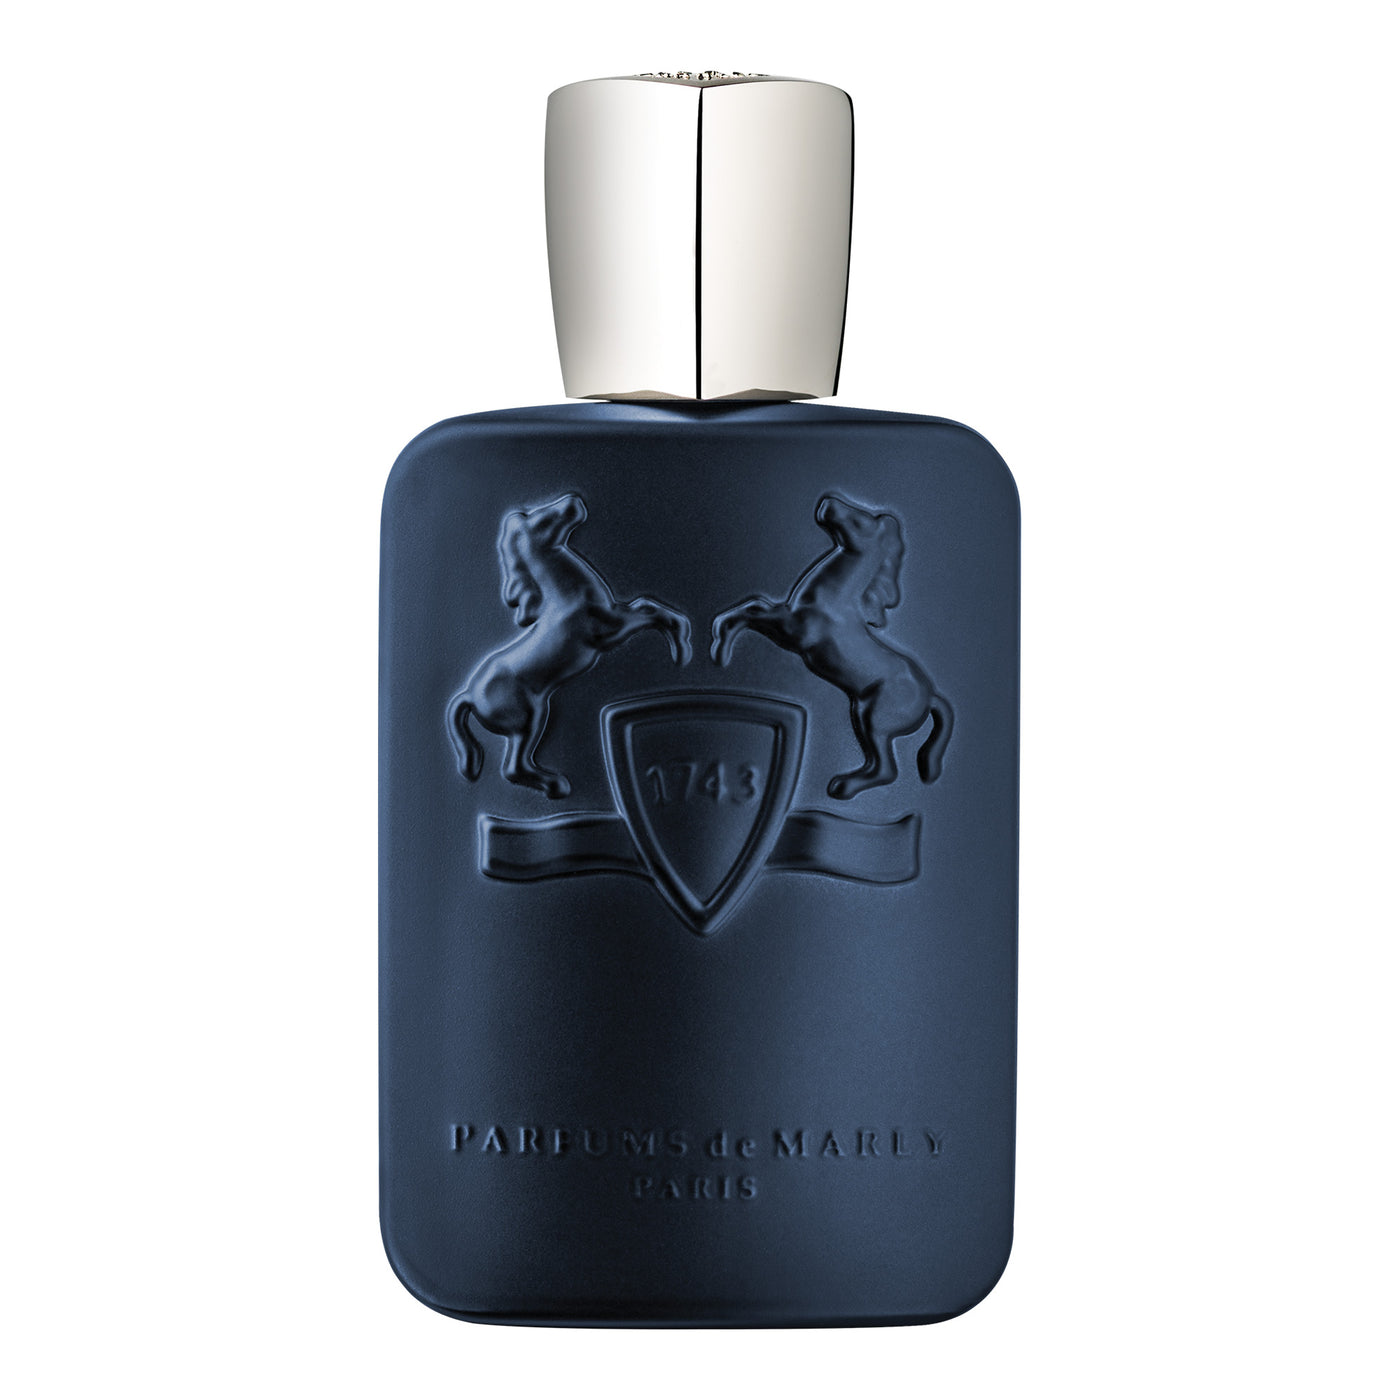 Parfums de Marly Layton - 125ml - Gharyal by Collectibles 